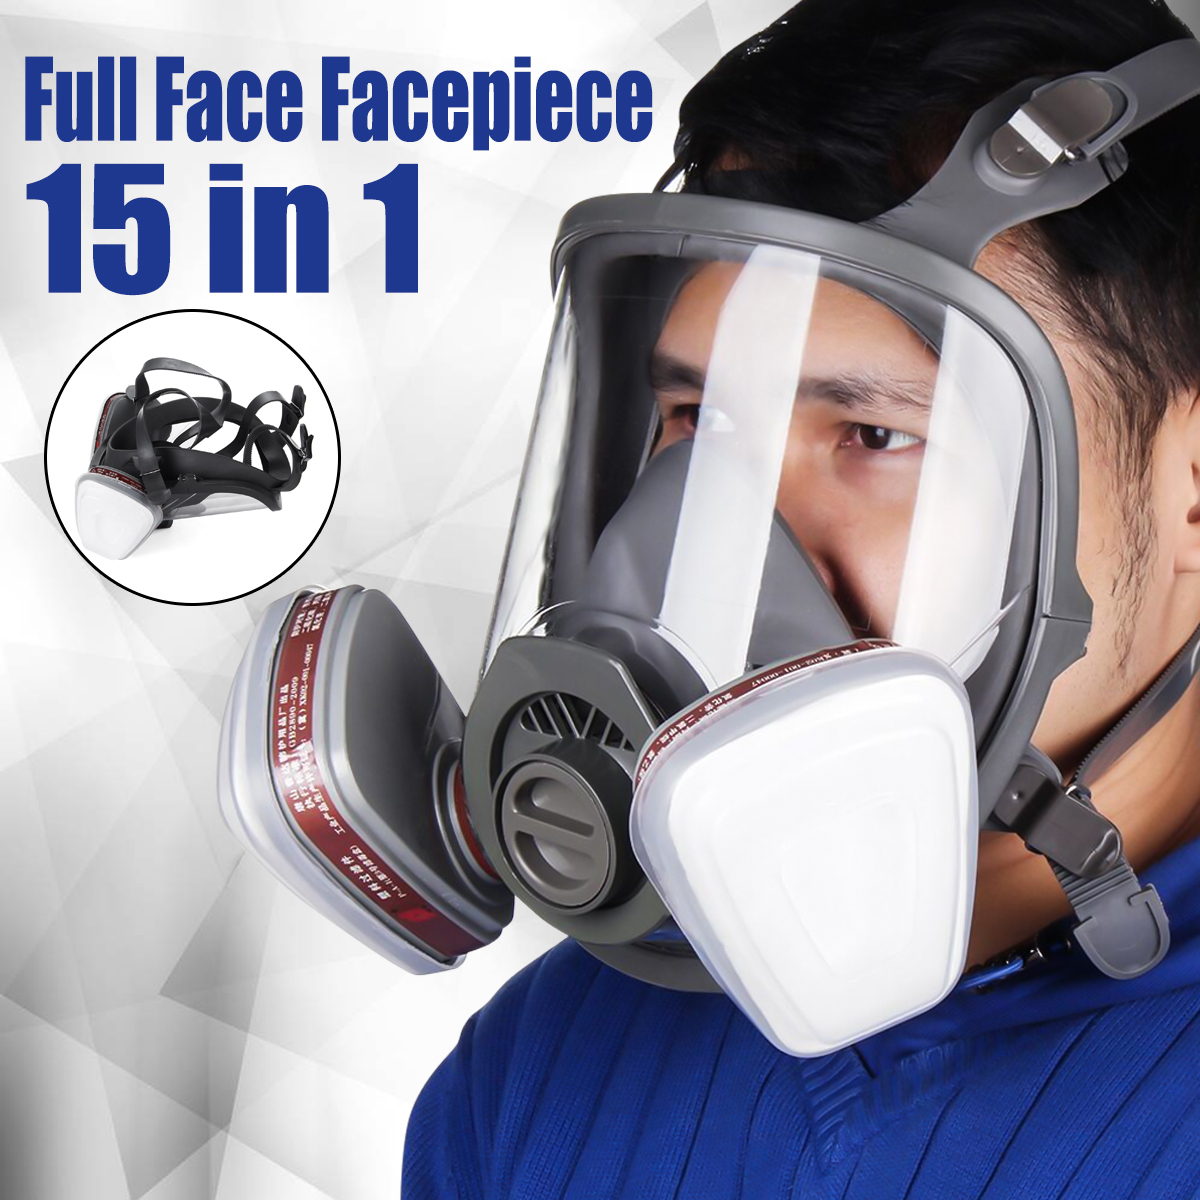 15 in 1 Full Face Gas Mask Facepiece Respirator Painting Spraying Mask 6800 Dust 15